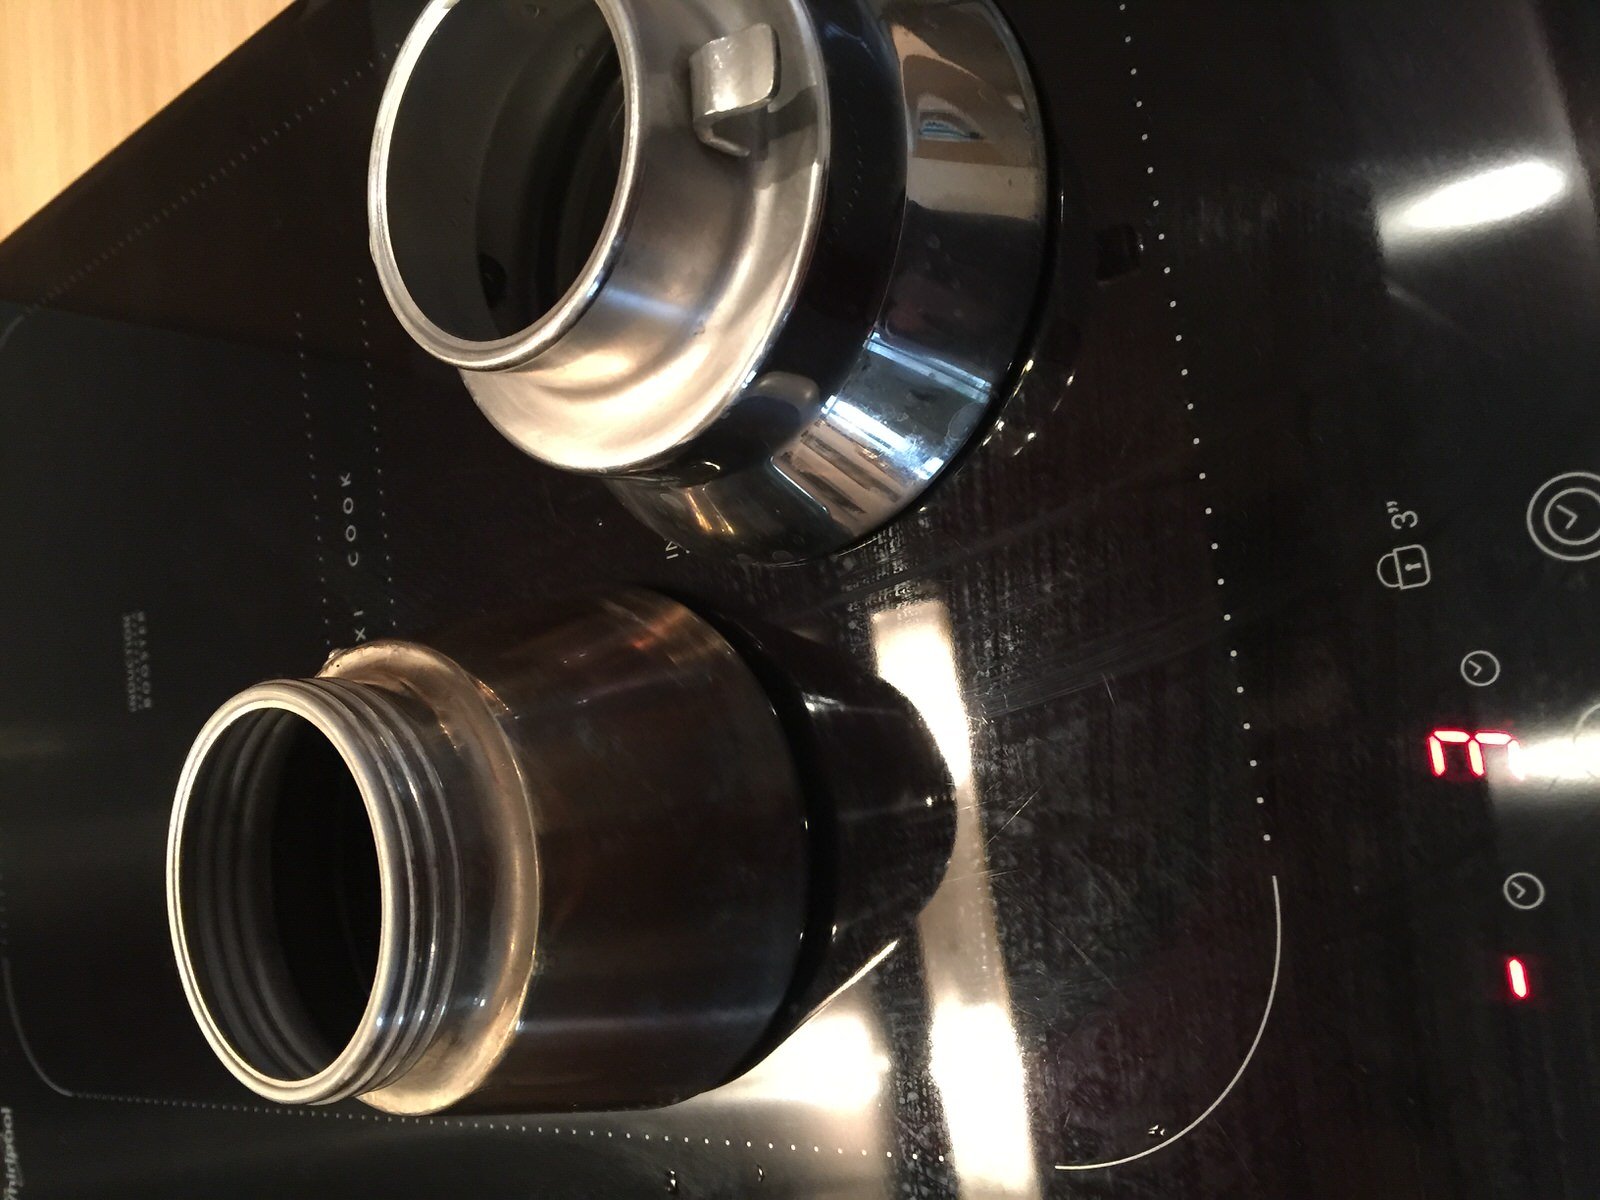 two moka pots work where on this induction hob one gets the "no pot" alert